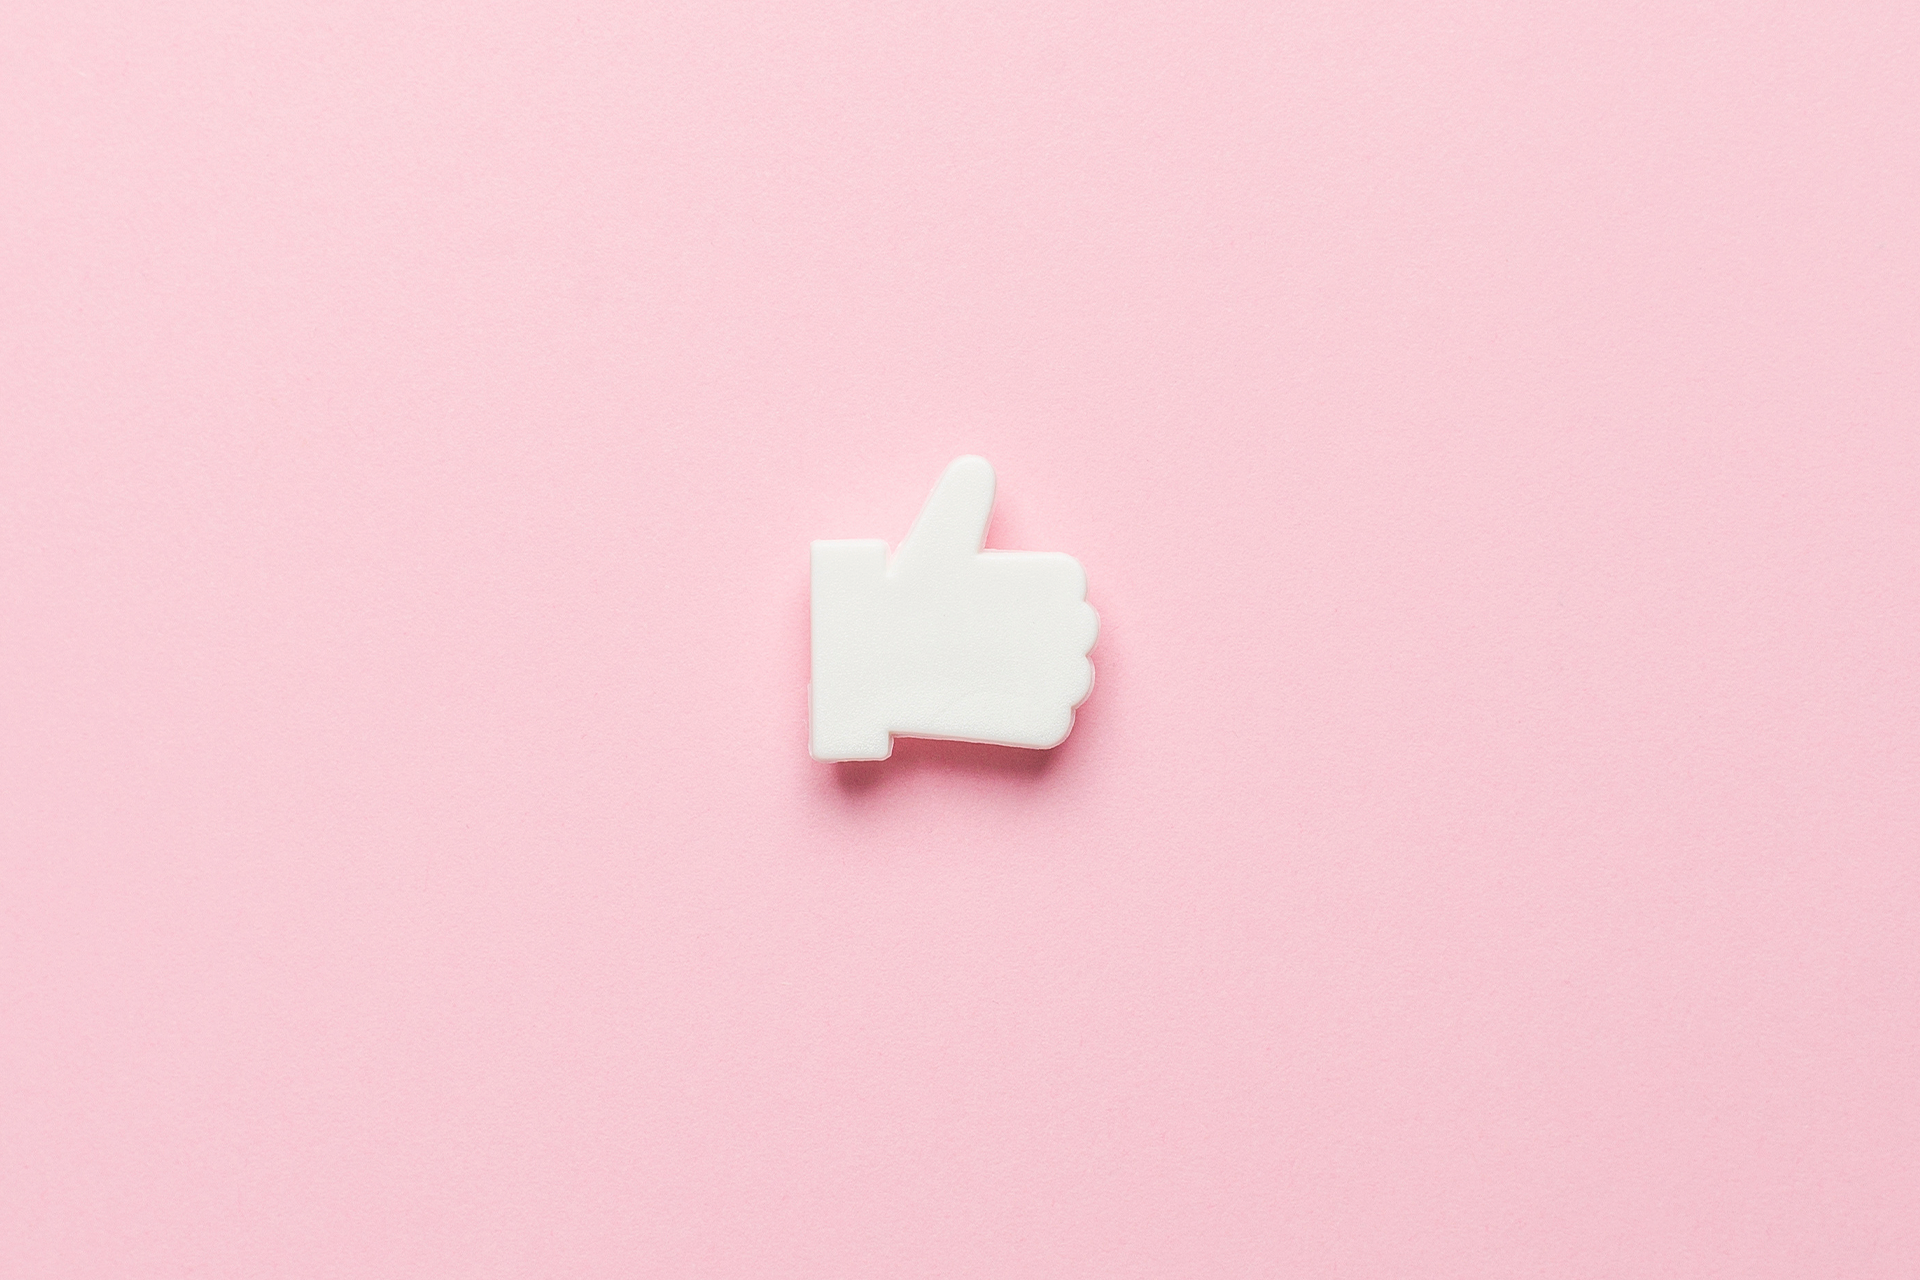 Facebook thumbs up "like" icon on pink background. Blog post: how to get more likes on your business Facebook page